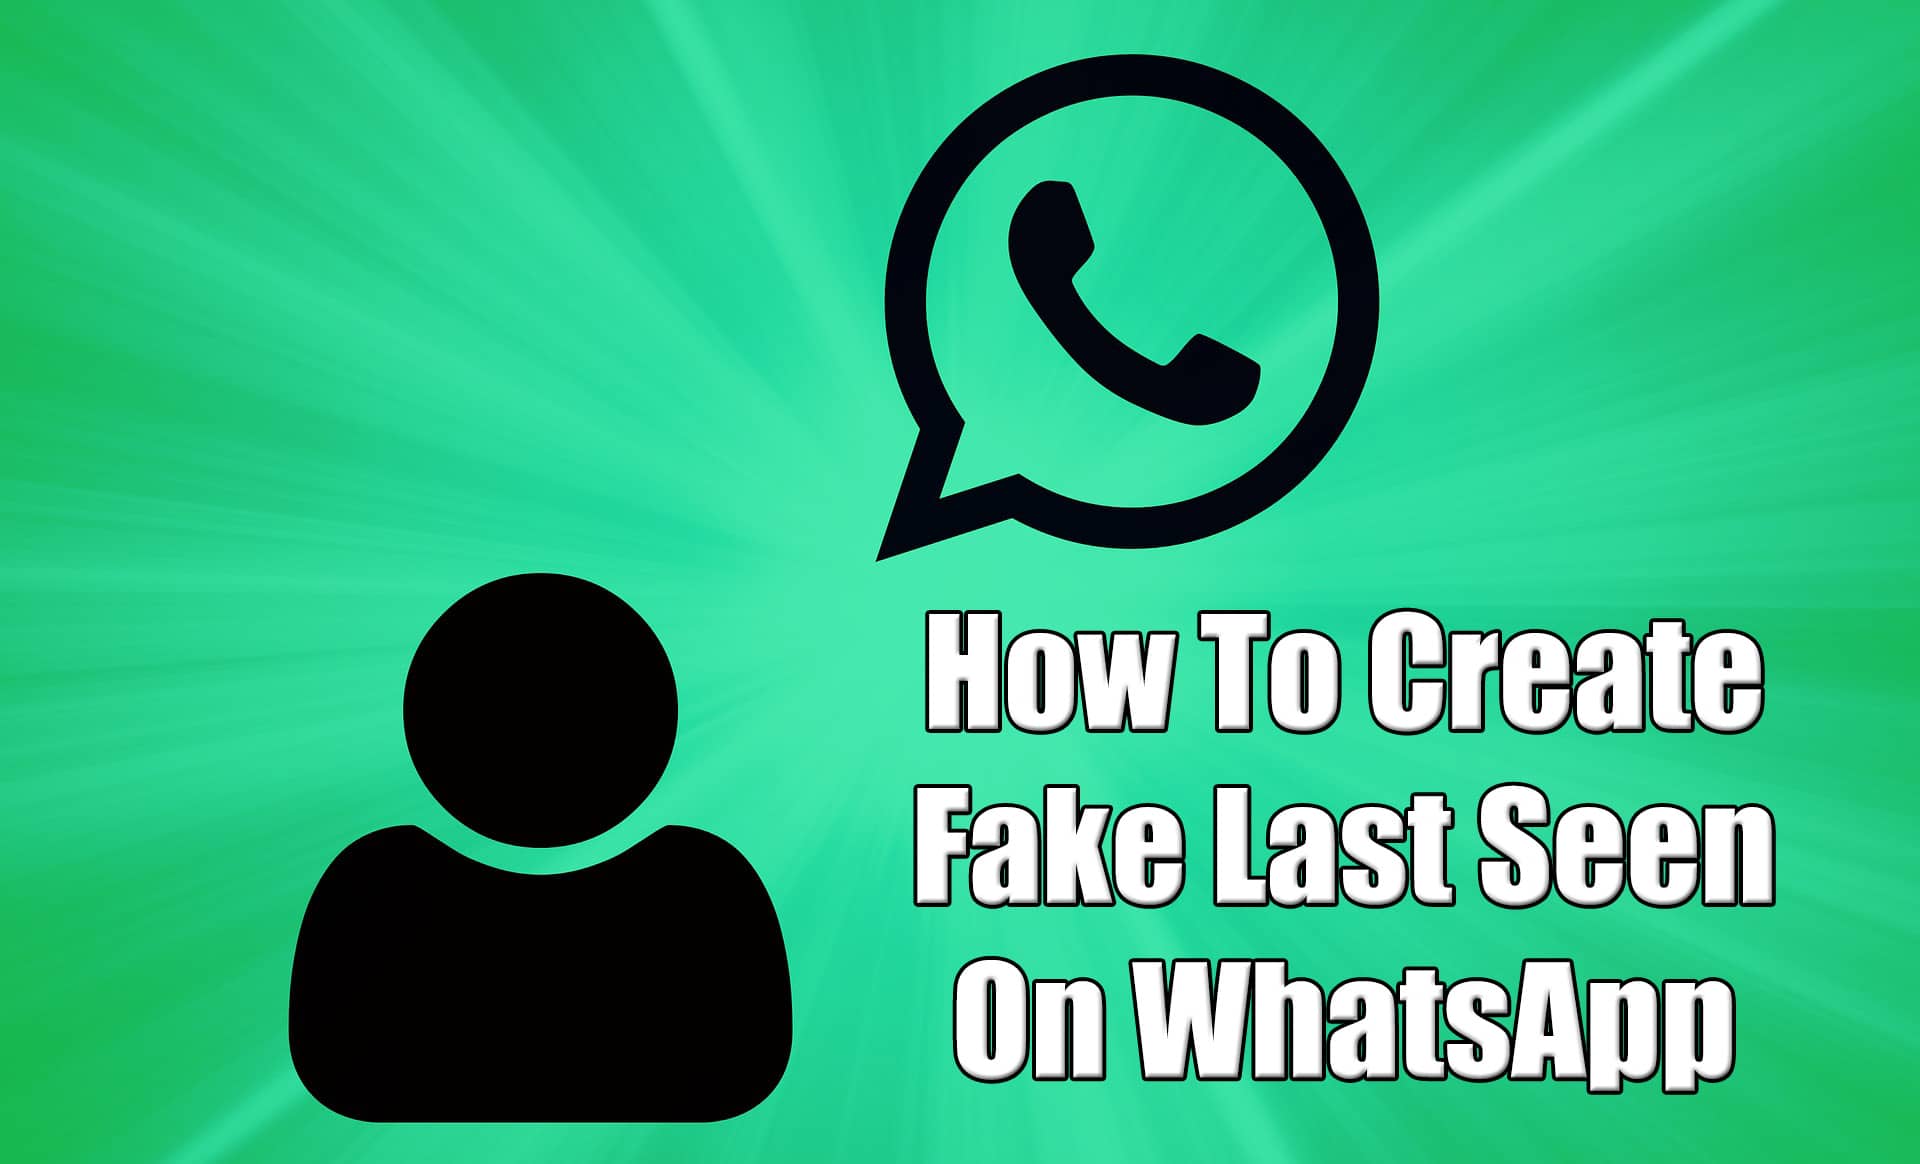 how to use whatsapp without phone number 2017